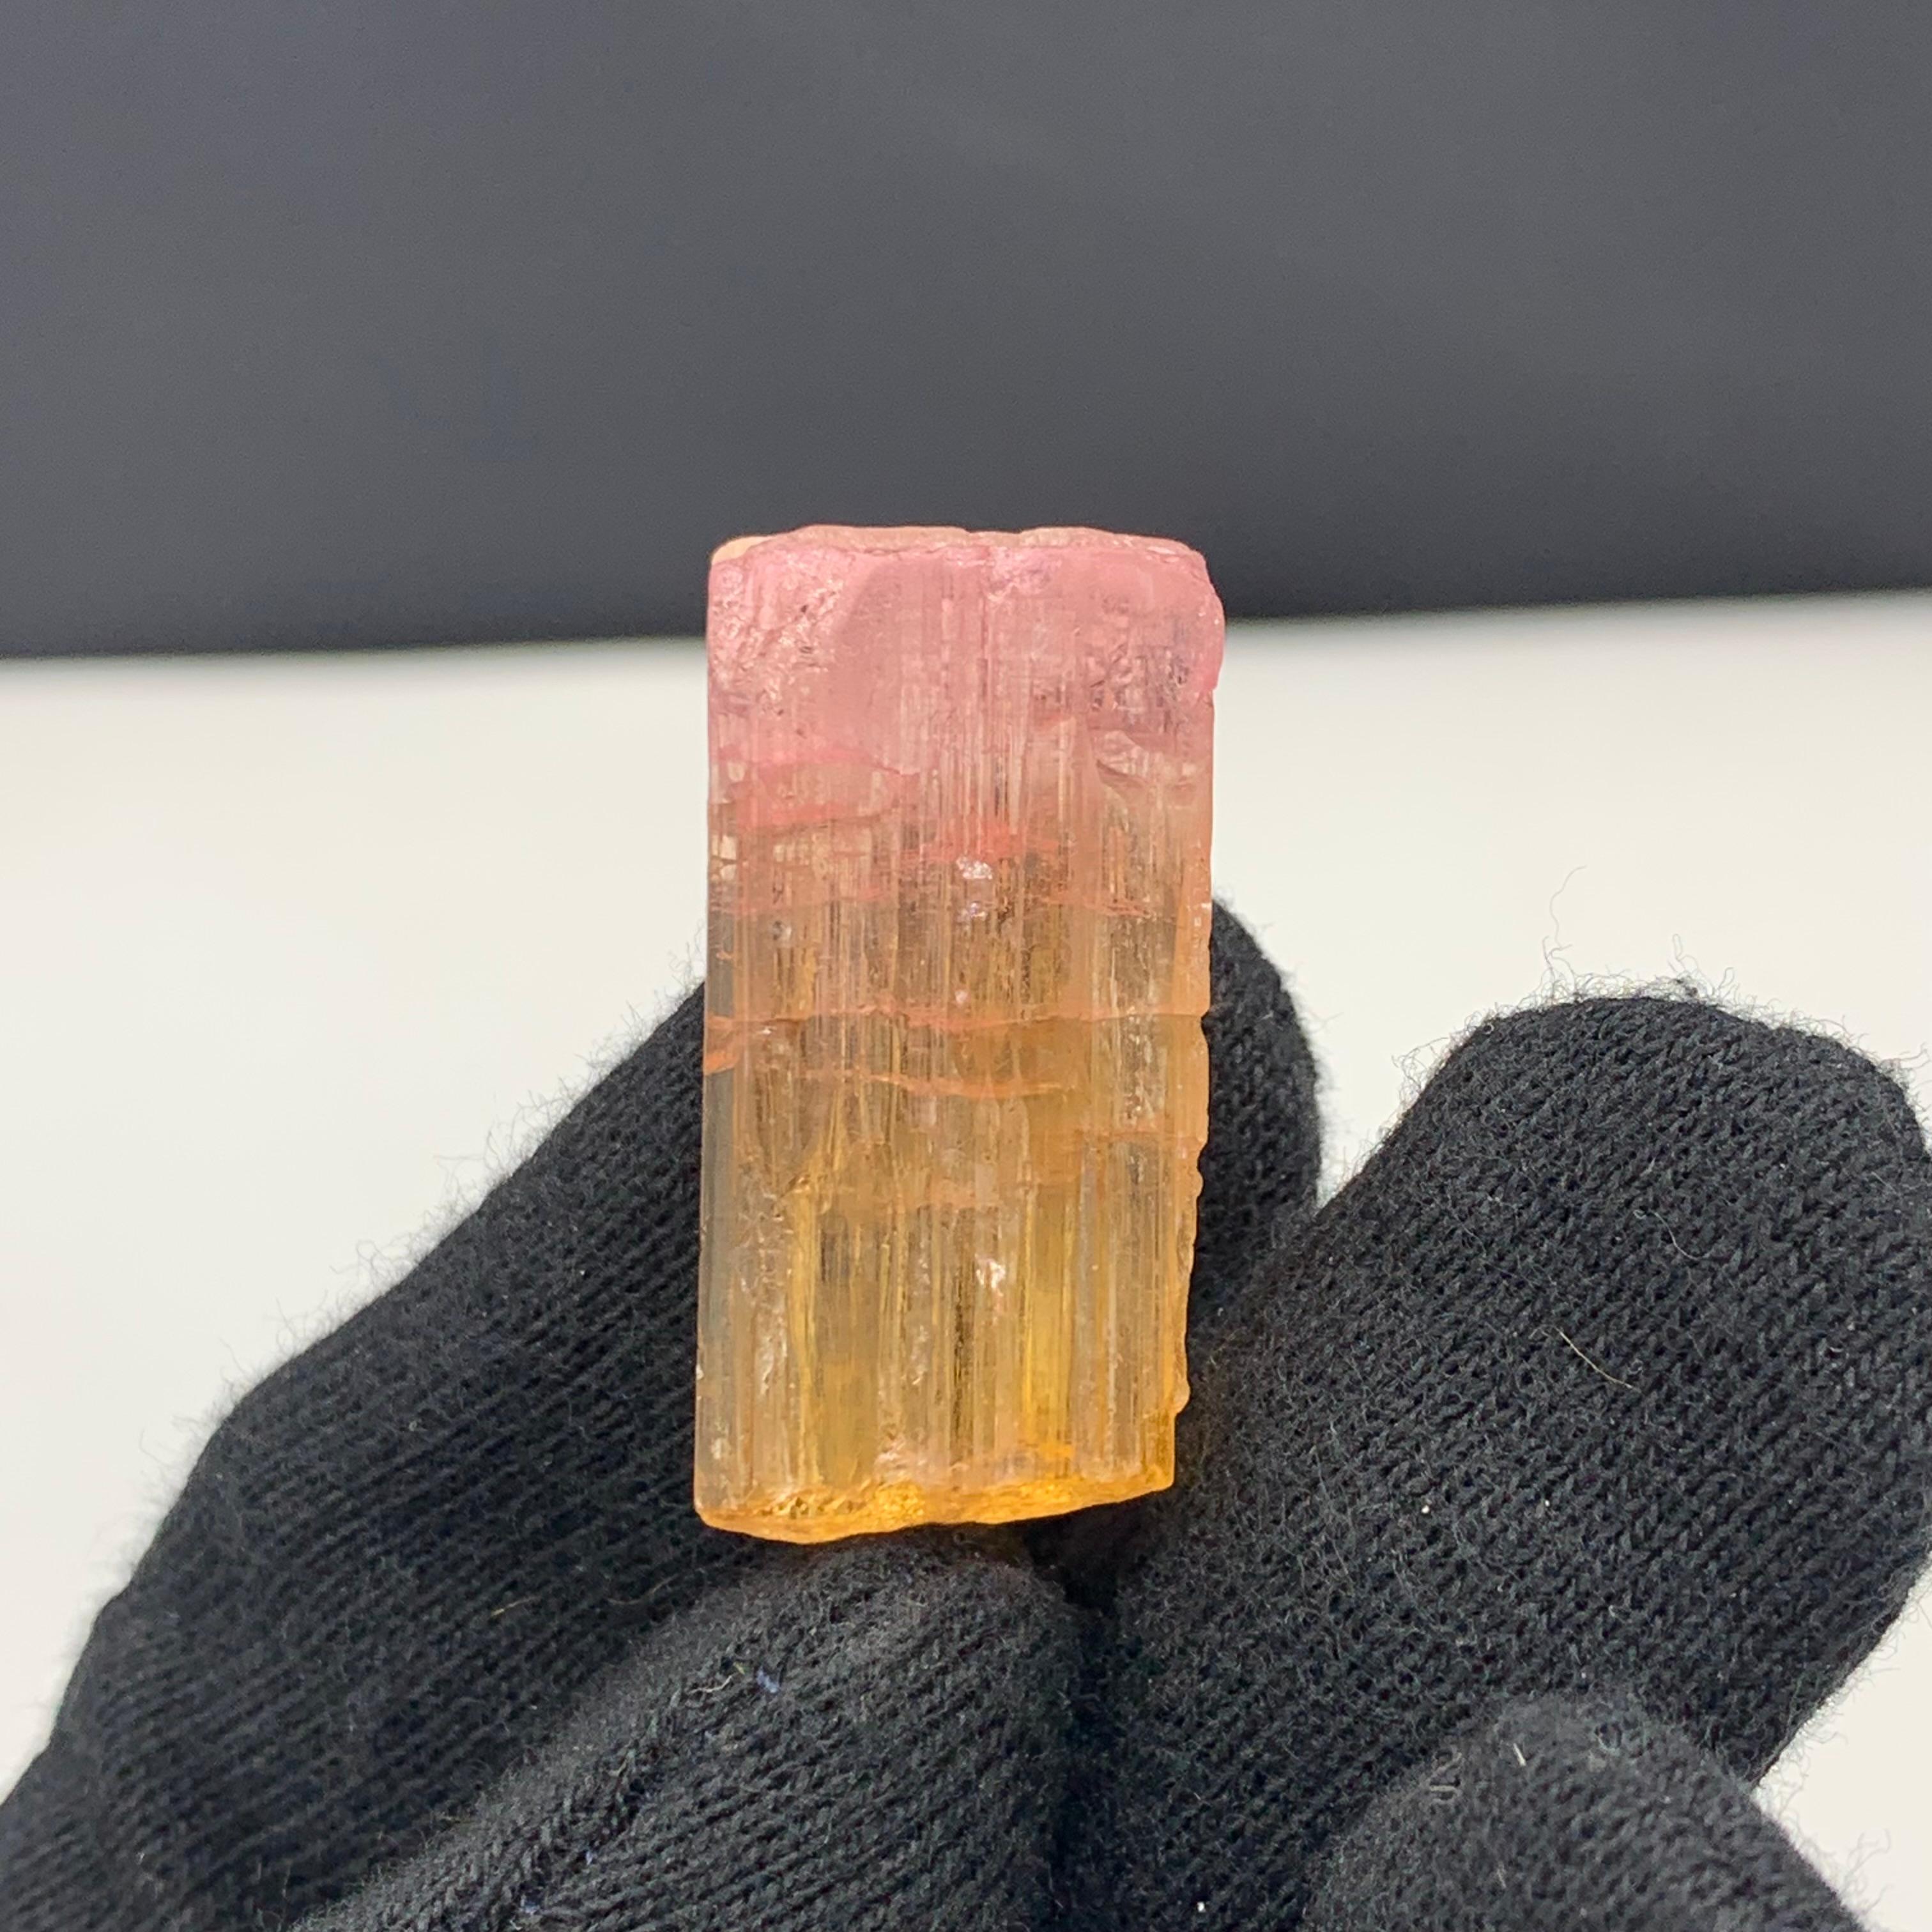 Other 48 Carat Amazing Bi Color Tourmaline Crystal From Paprook Mine, Afghanistan For Sale